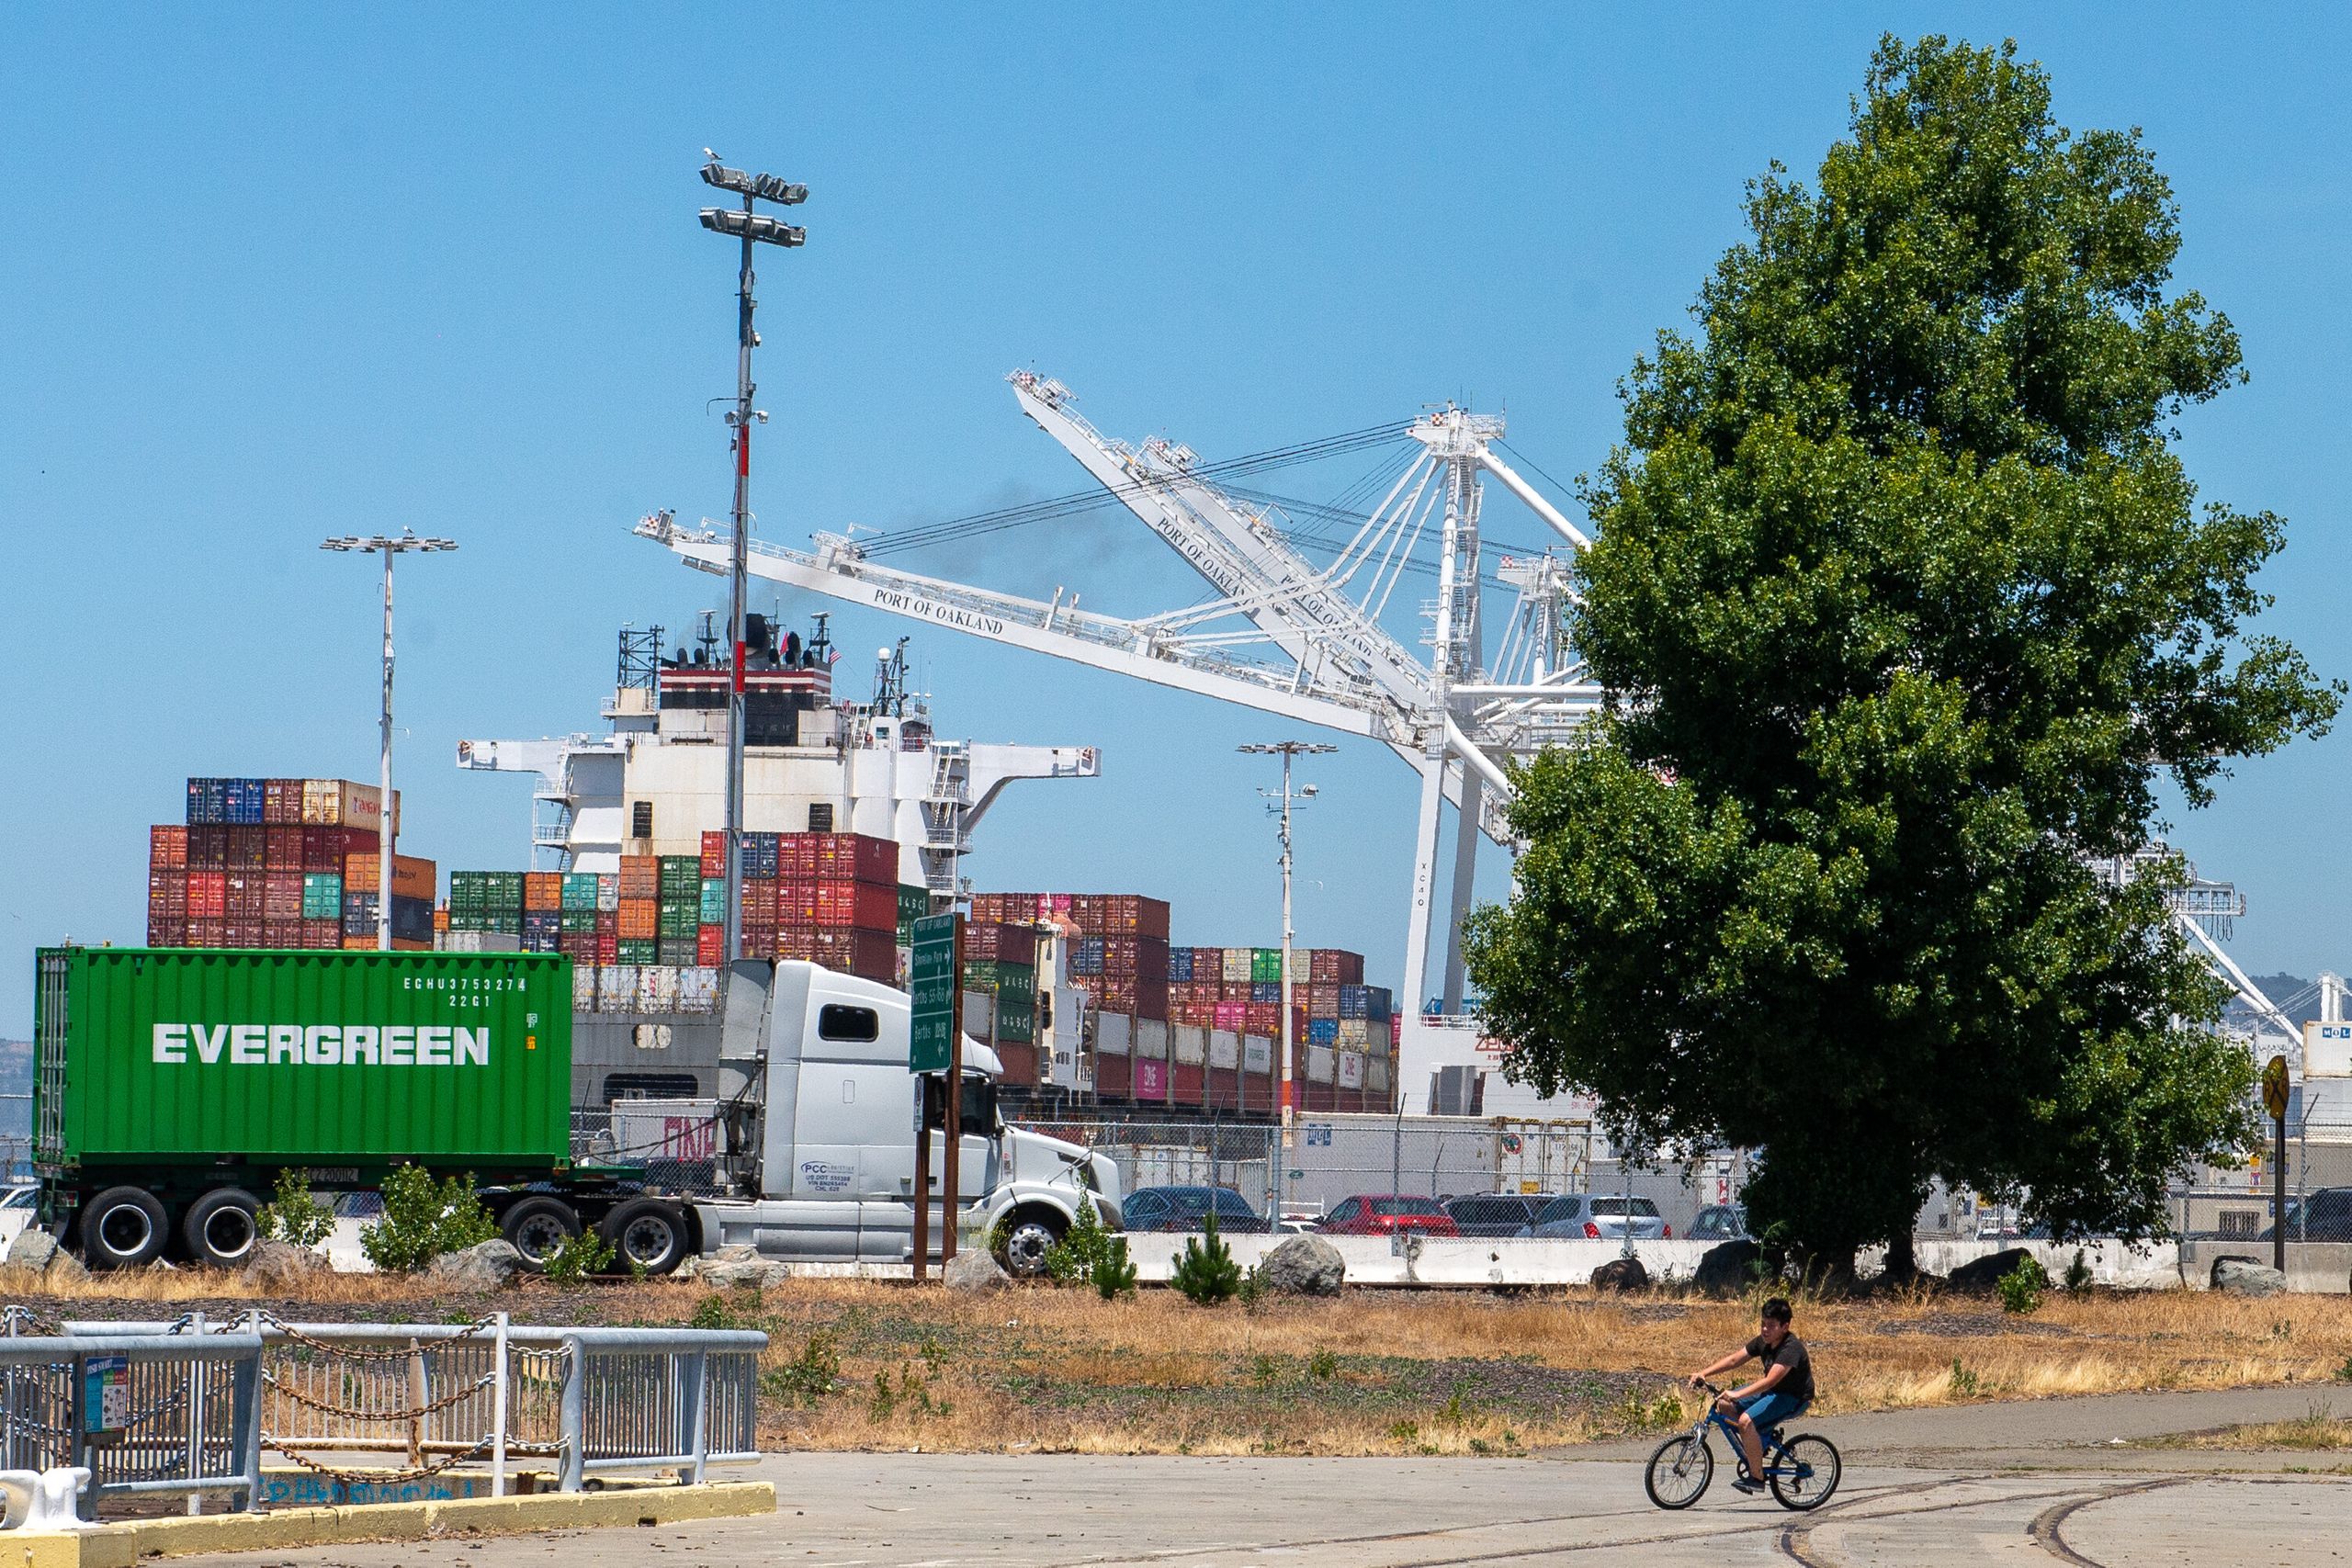 Ken Vasquez, 10, rides his bike at Middle Harbor Shoreline Park while shipping trucks haul freight at the Port of Oakland. Ne